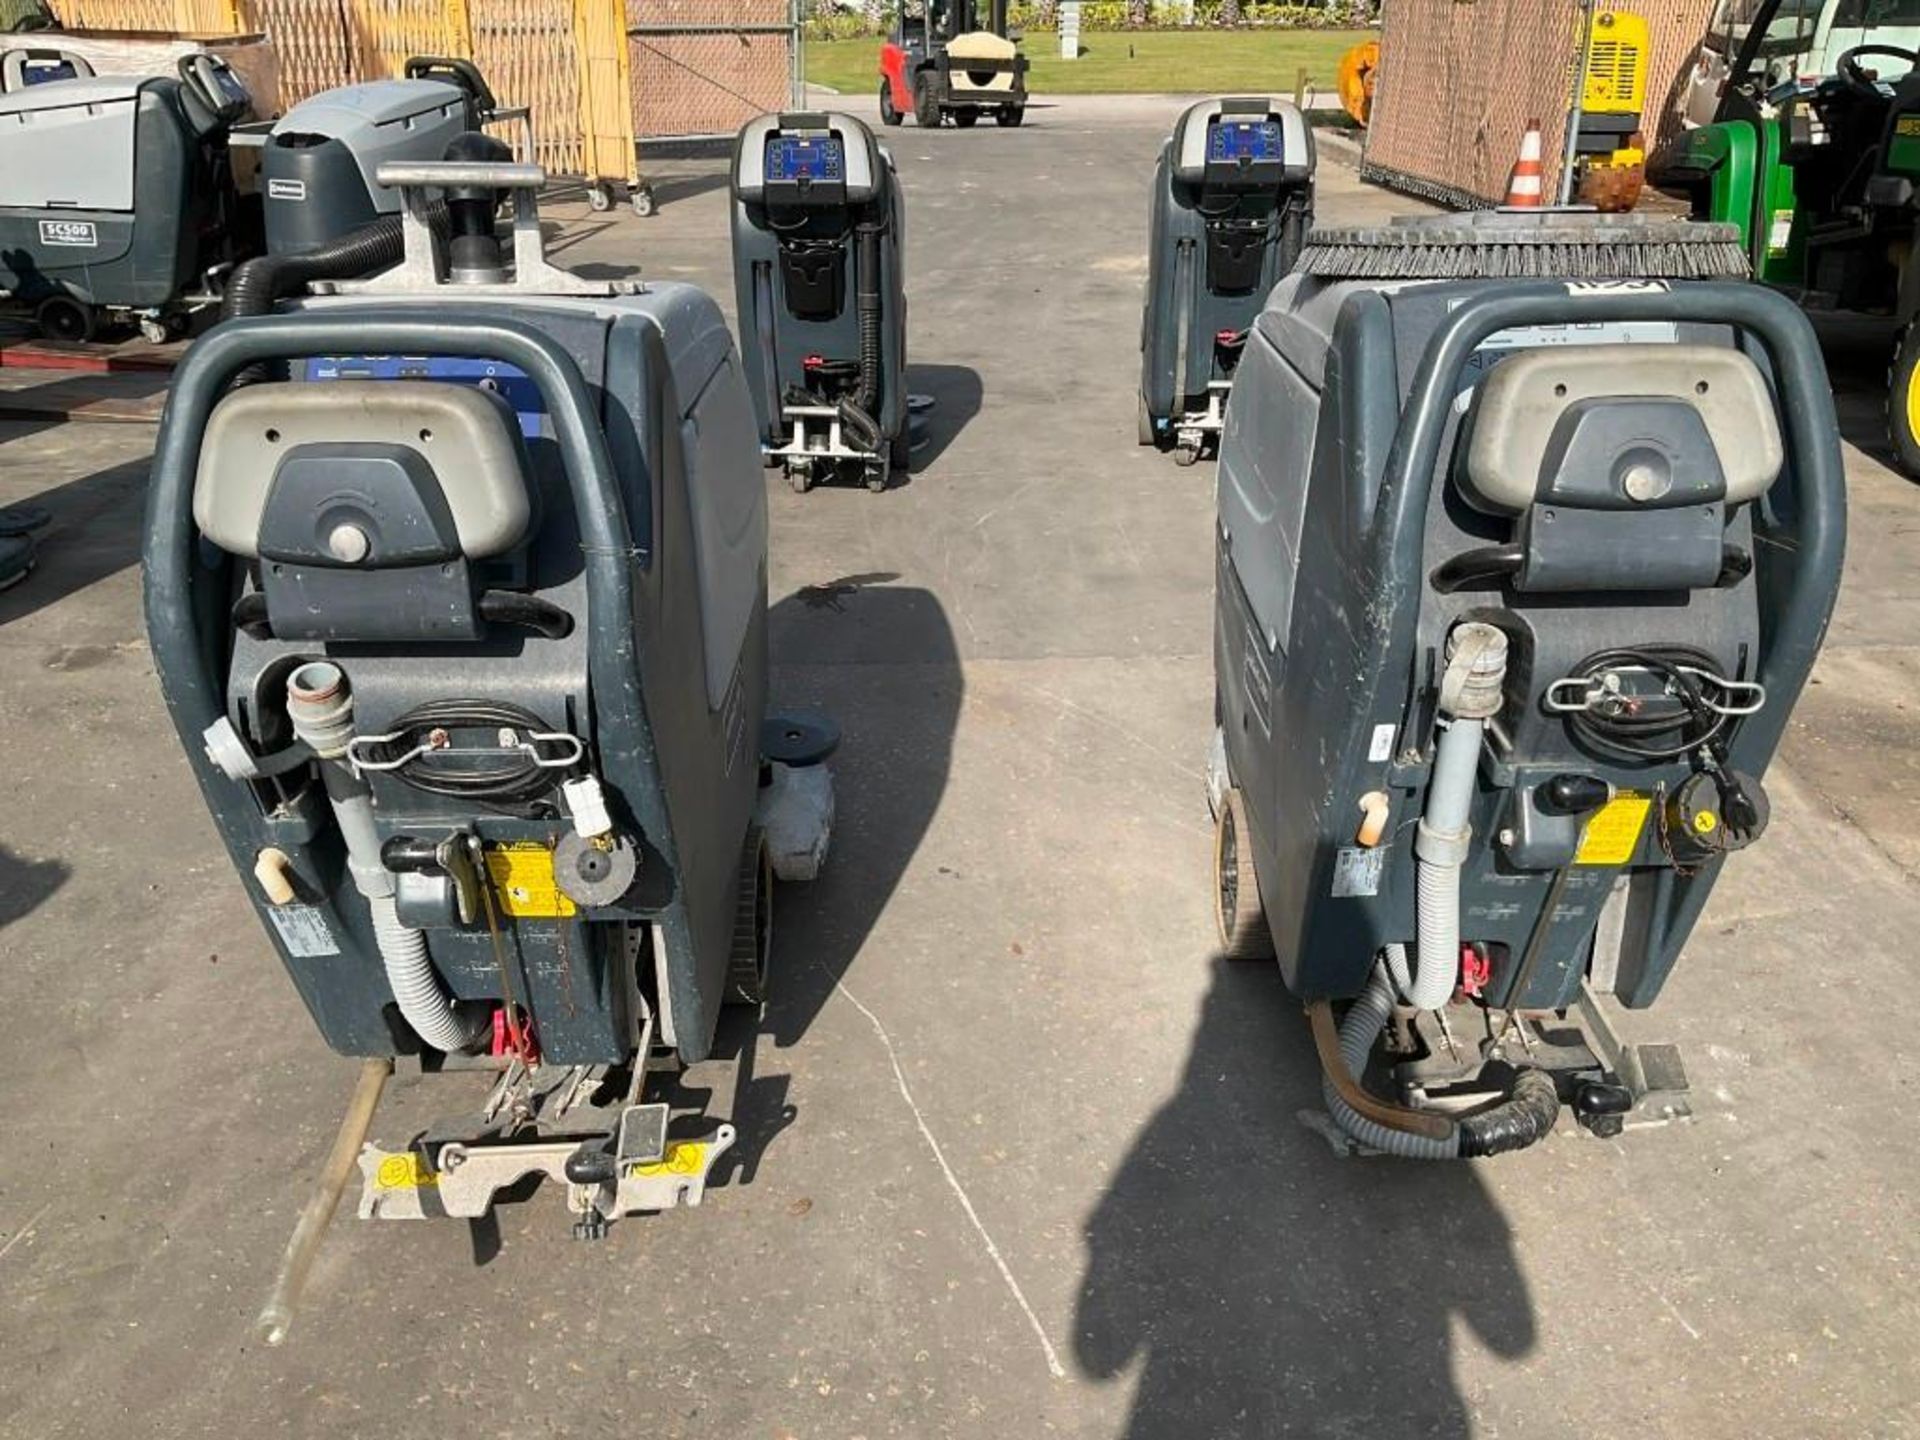 ( 2 ) NILFISK ADVANCE WALK BEHIND FLOOR SCRUBBER MODEL AXP ADFINITY X20D, ELECTRIC, APPROX 24 VOLTS, - Image 4 of 16